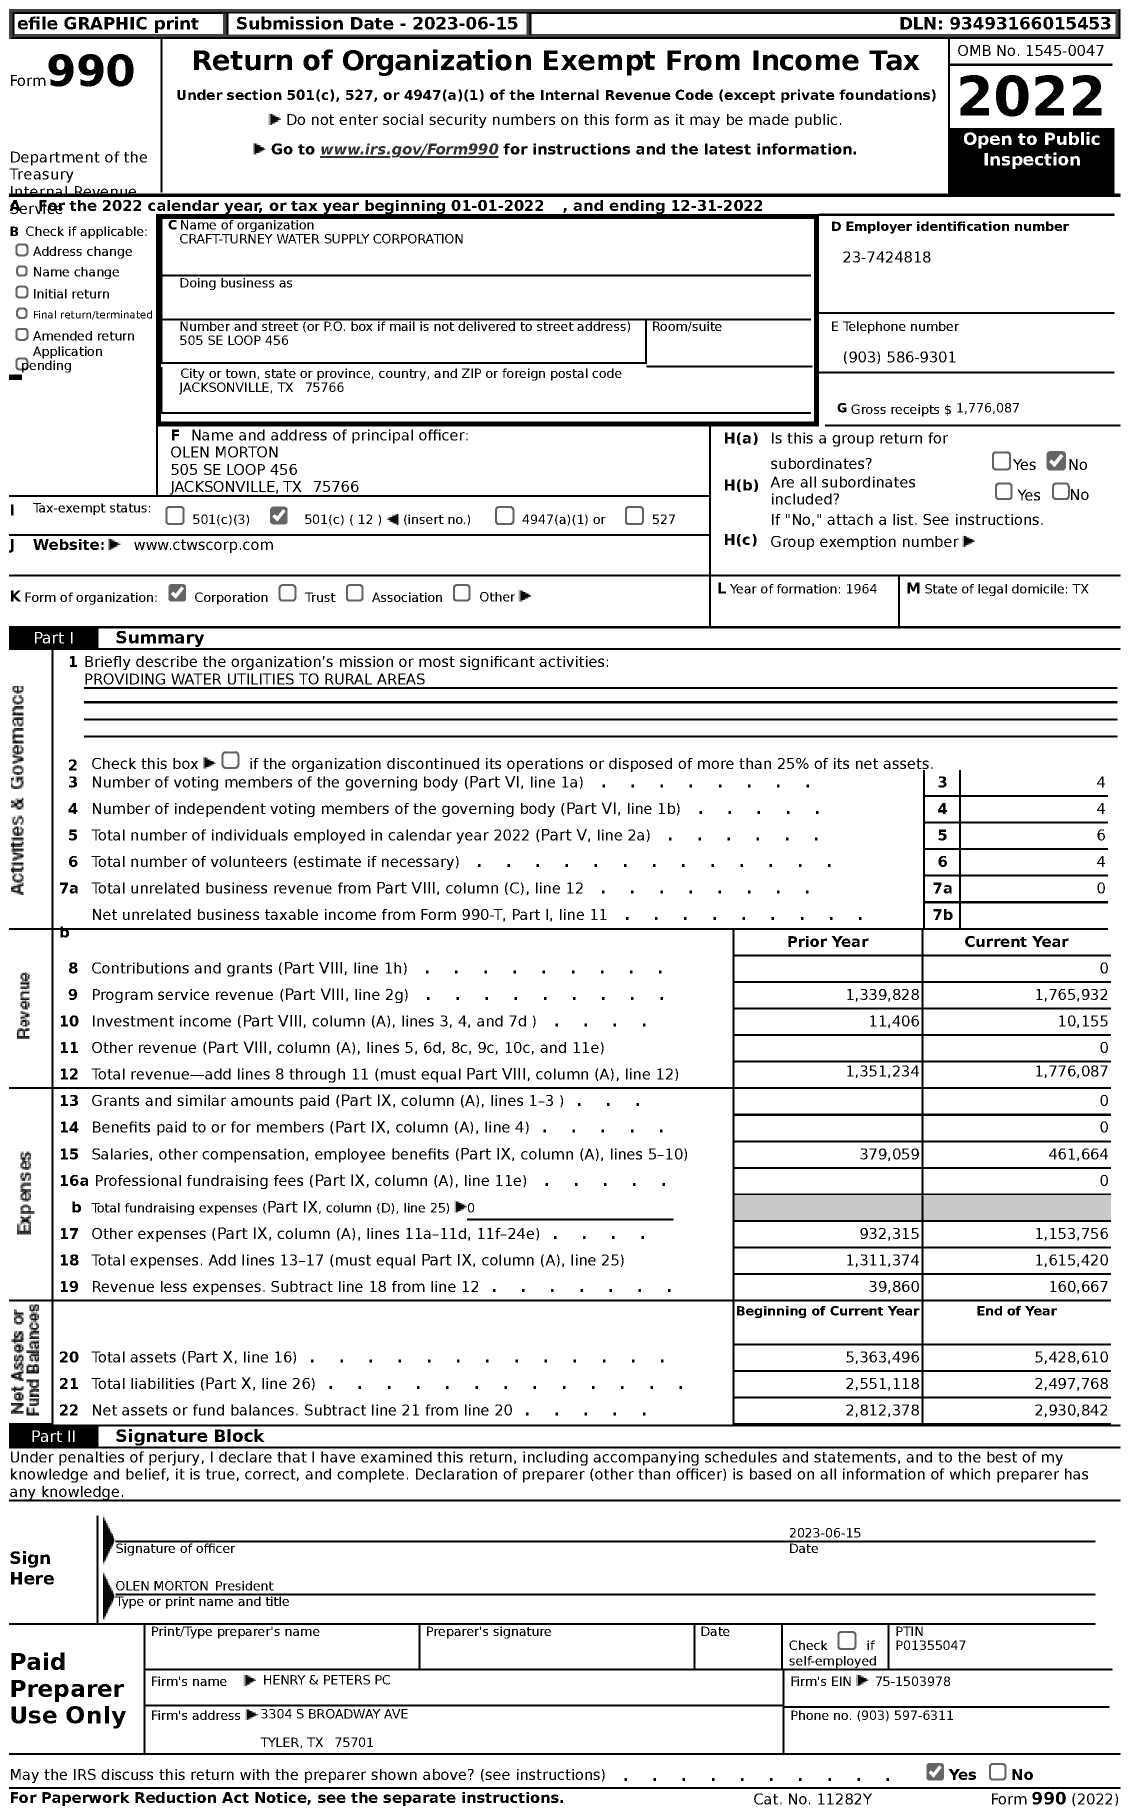 Image of first page of 2022 Form 990 for Craft-Turney Water Supply Corporation